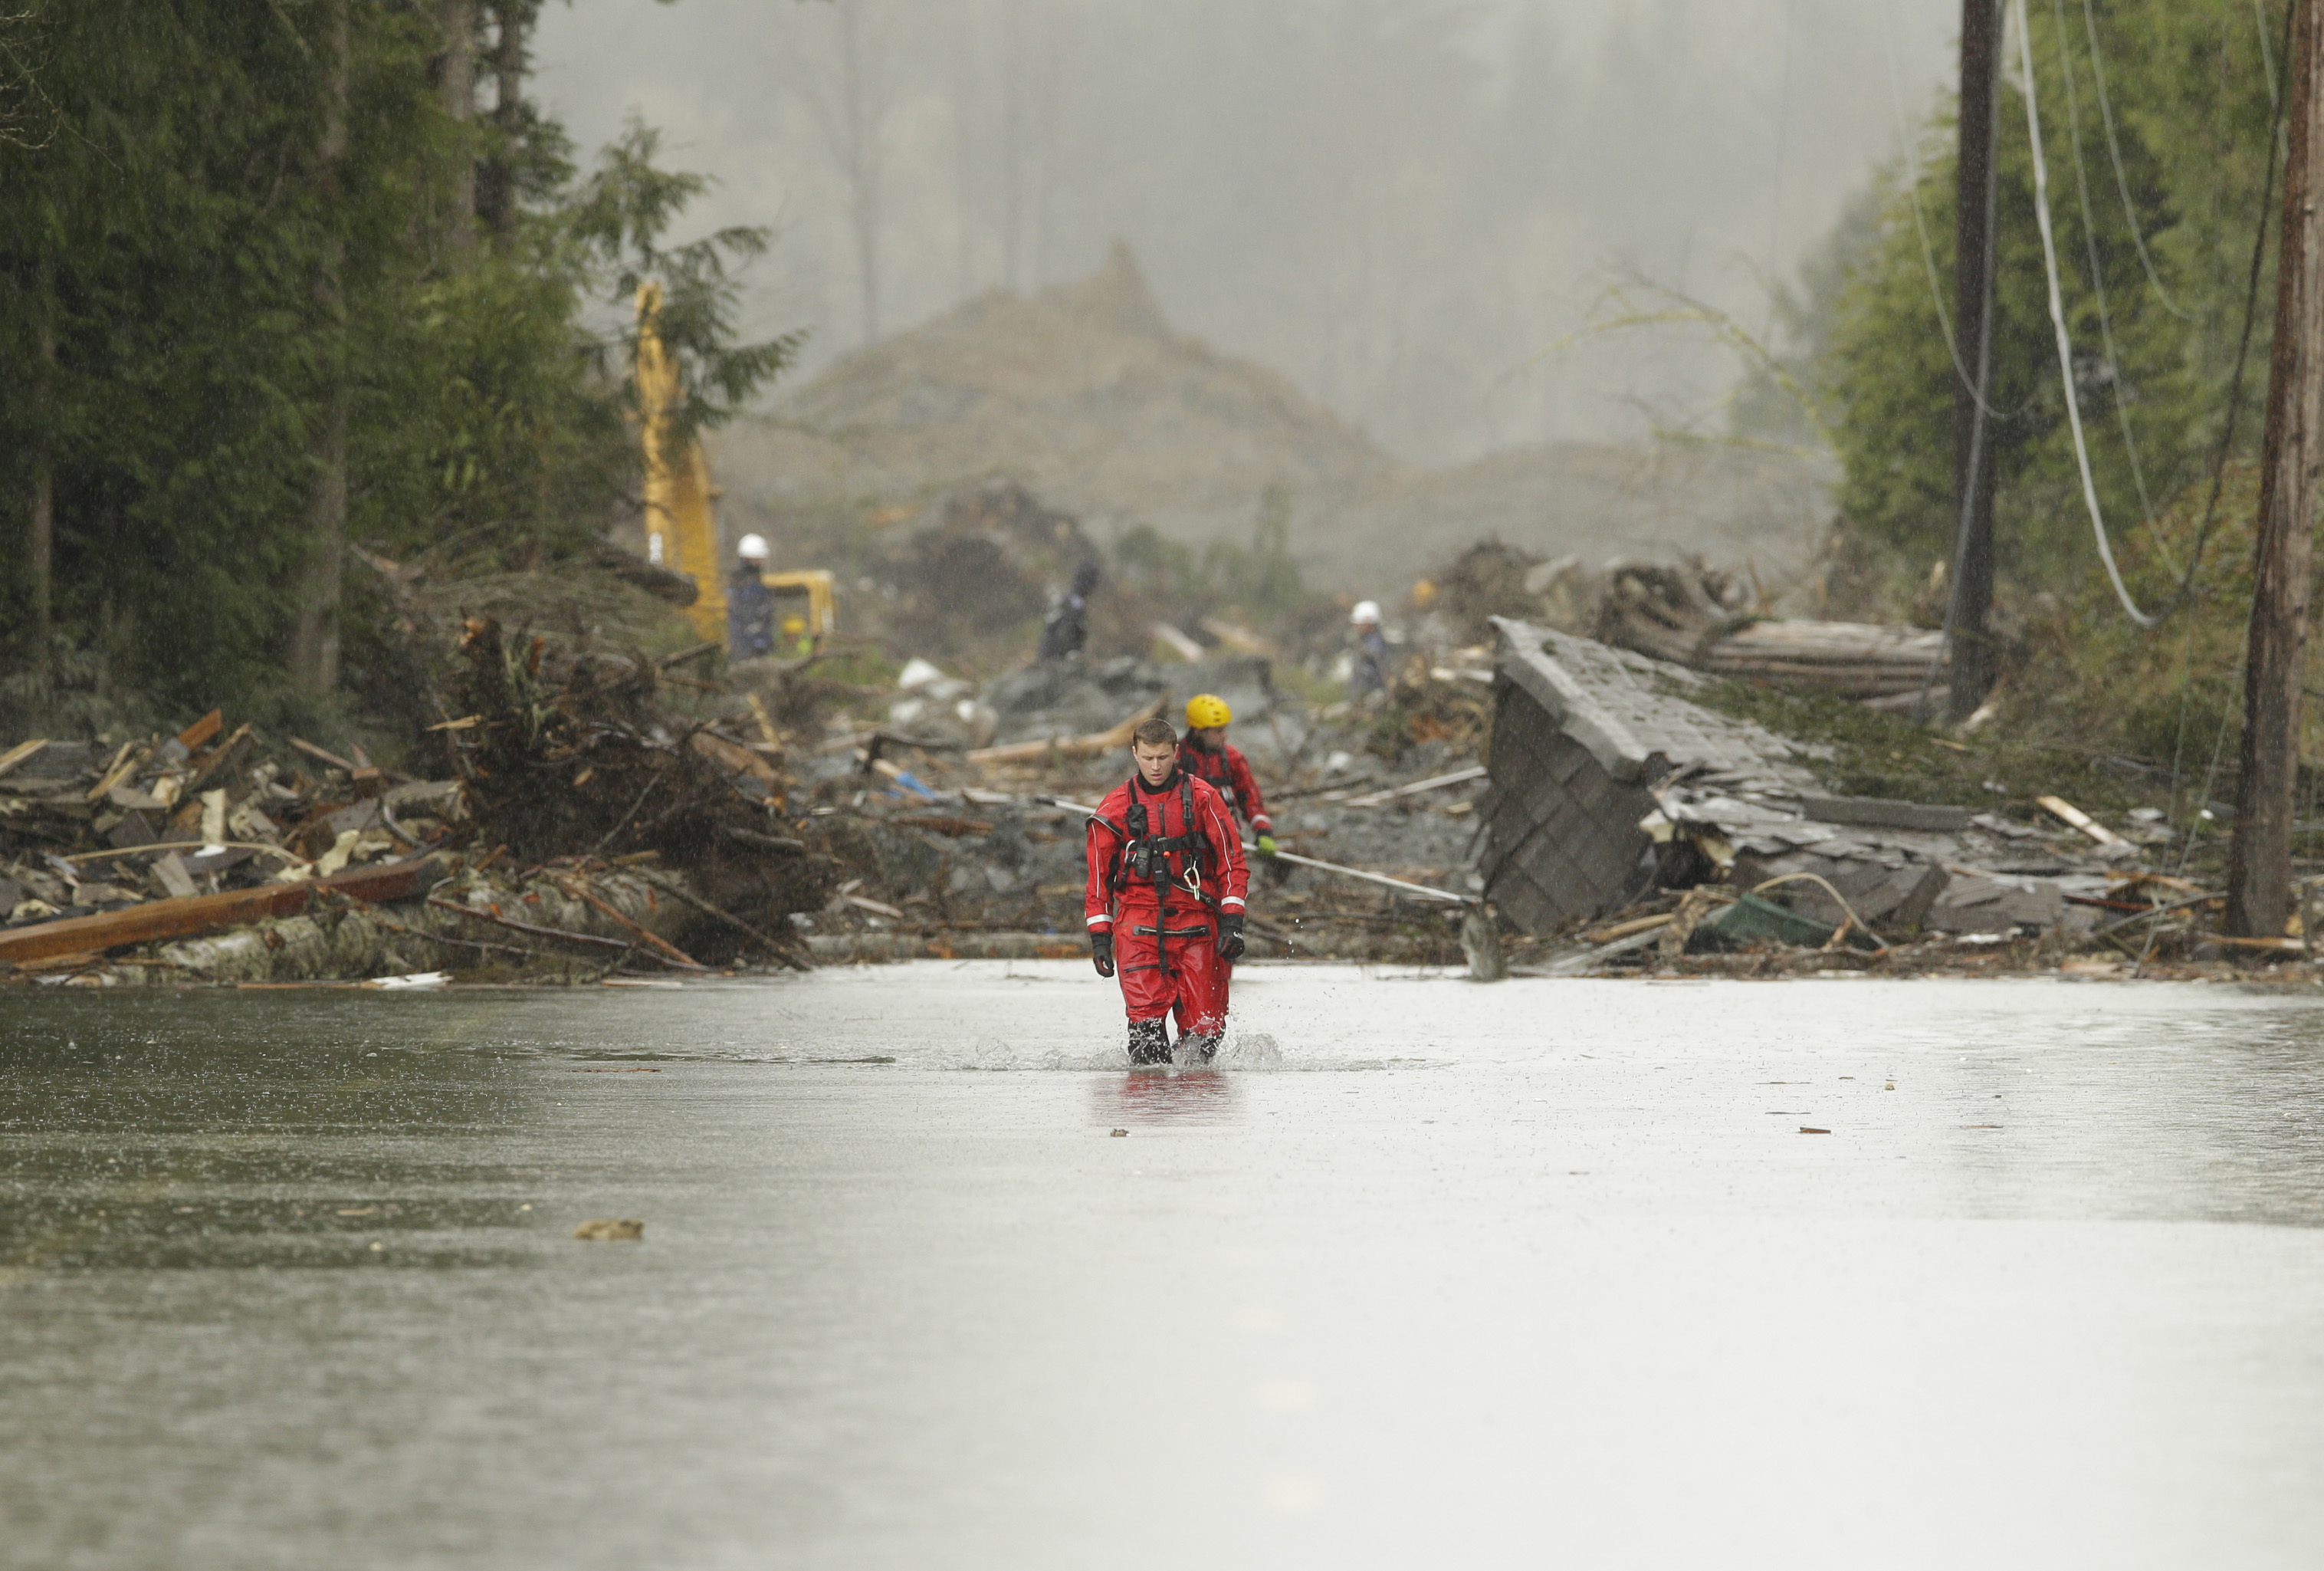 OSO, WA - MARCH 27: Search and rescue teams continue to work on March 27, 2014 in Oso, Washington. A massive mudslide killed at least twenty-five and left many missing. (Photo by Ted S. Warre